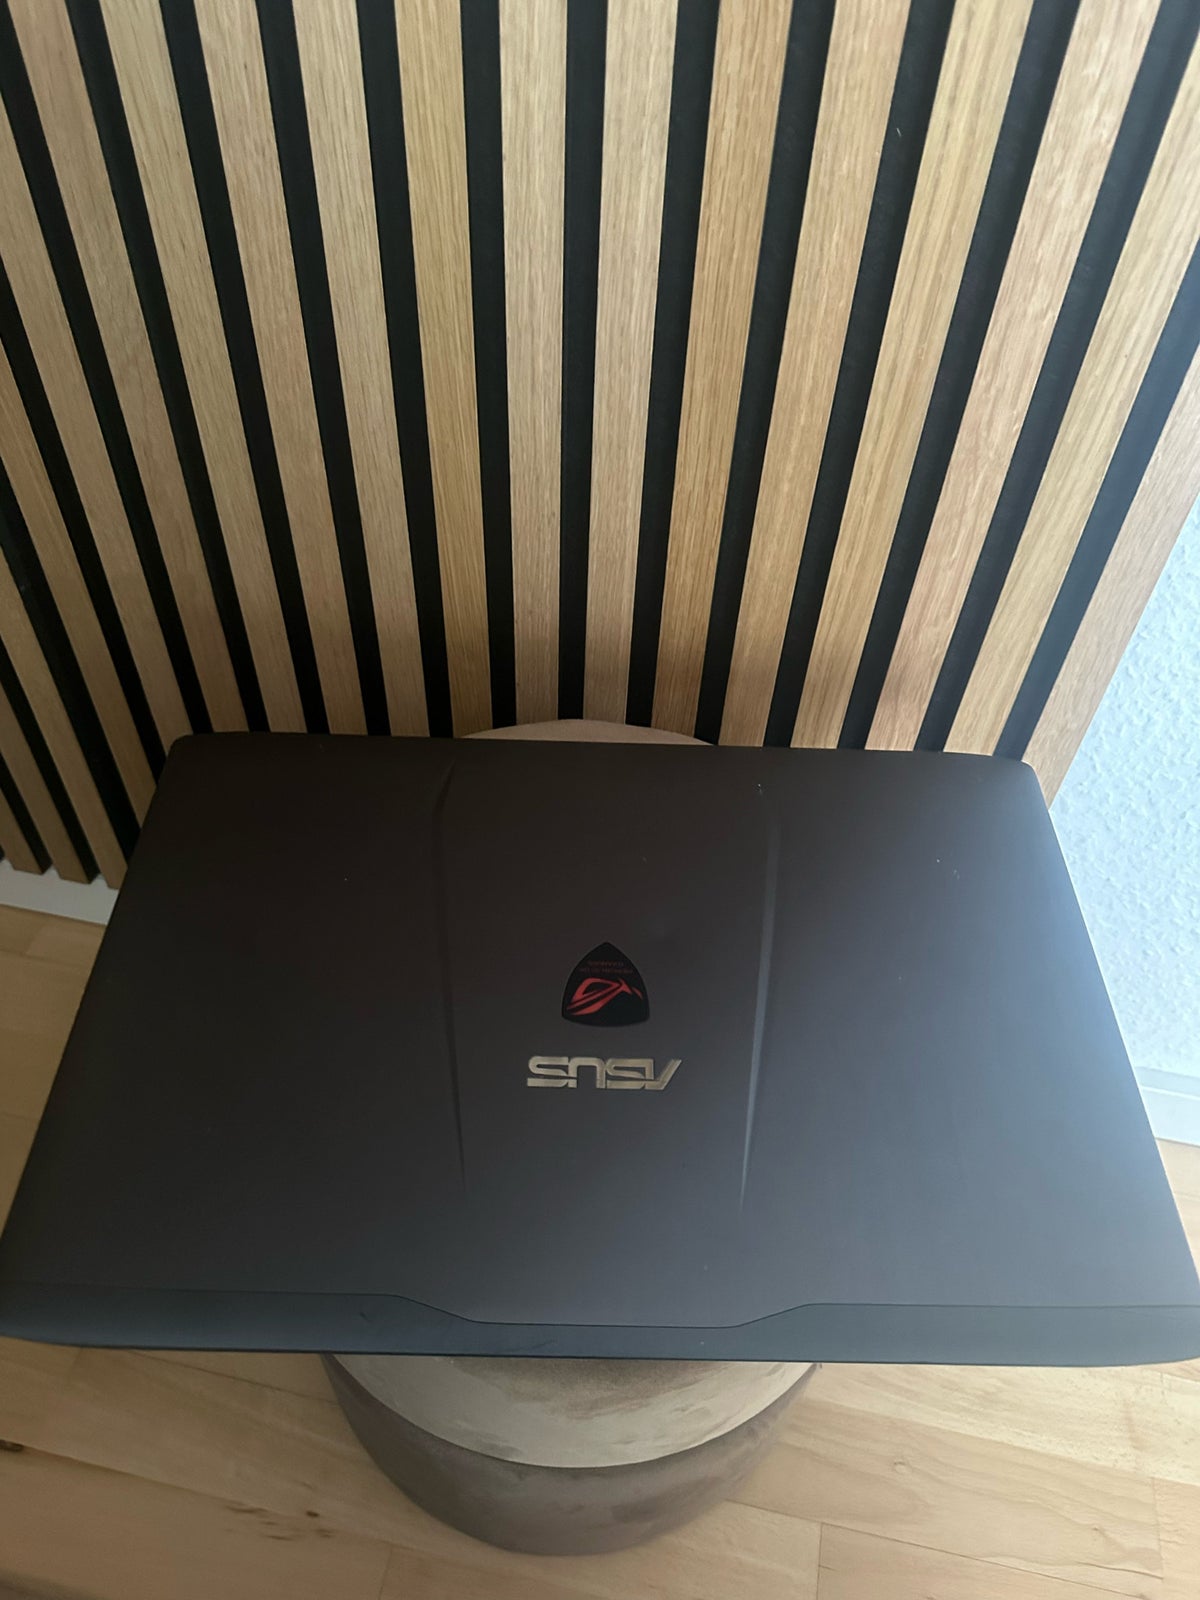 Asus Rog, Core i7 GHz, 16 GB ram